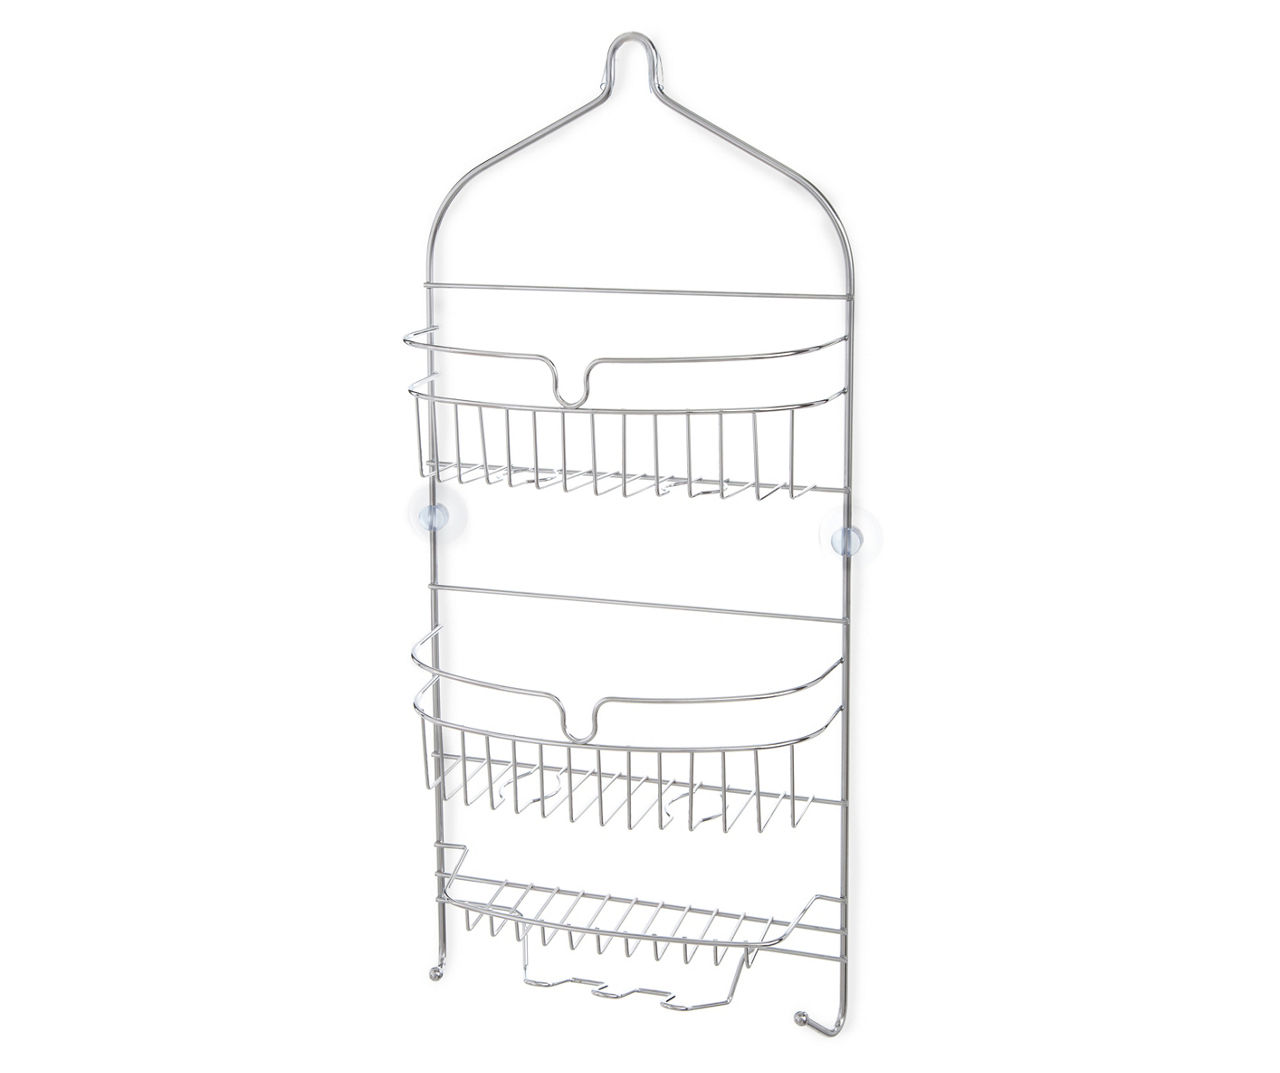 Kenney Gray Large 3-Shelf Rust-Proof Hanging Shower Caddy